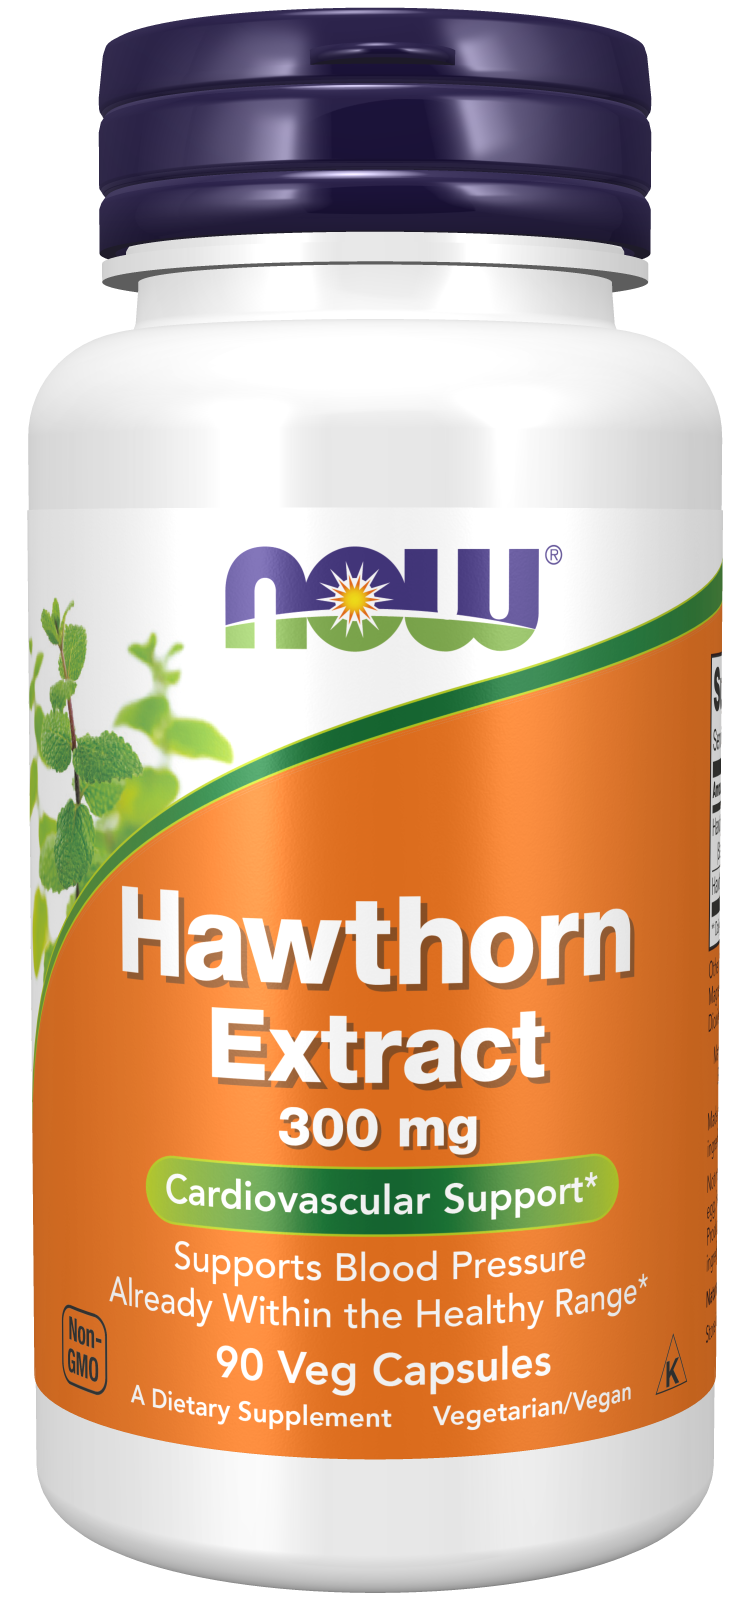 Hawthorn Extract 300 mg - 90 Veg Capsules Bottle Front